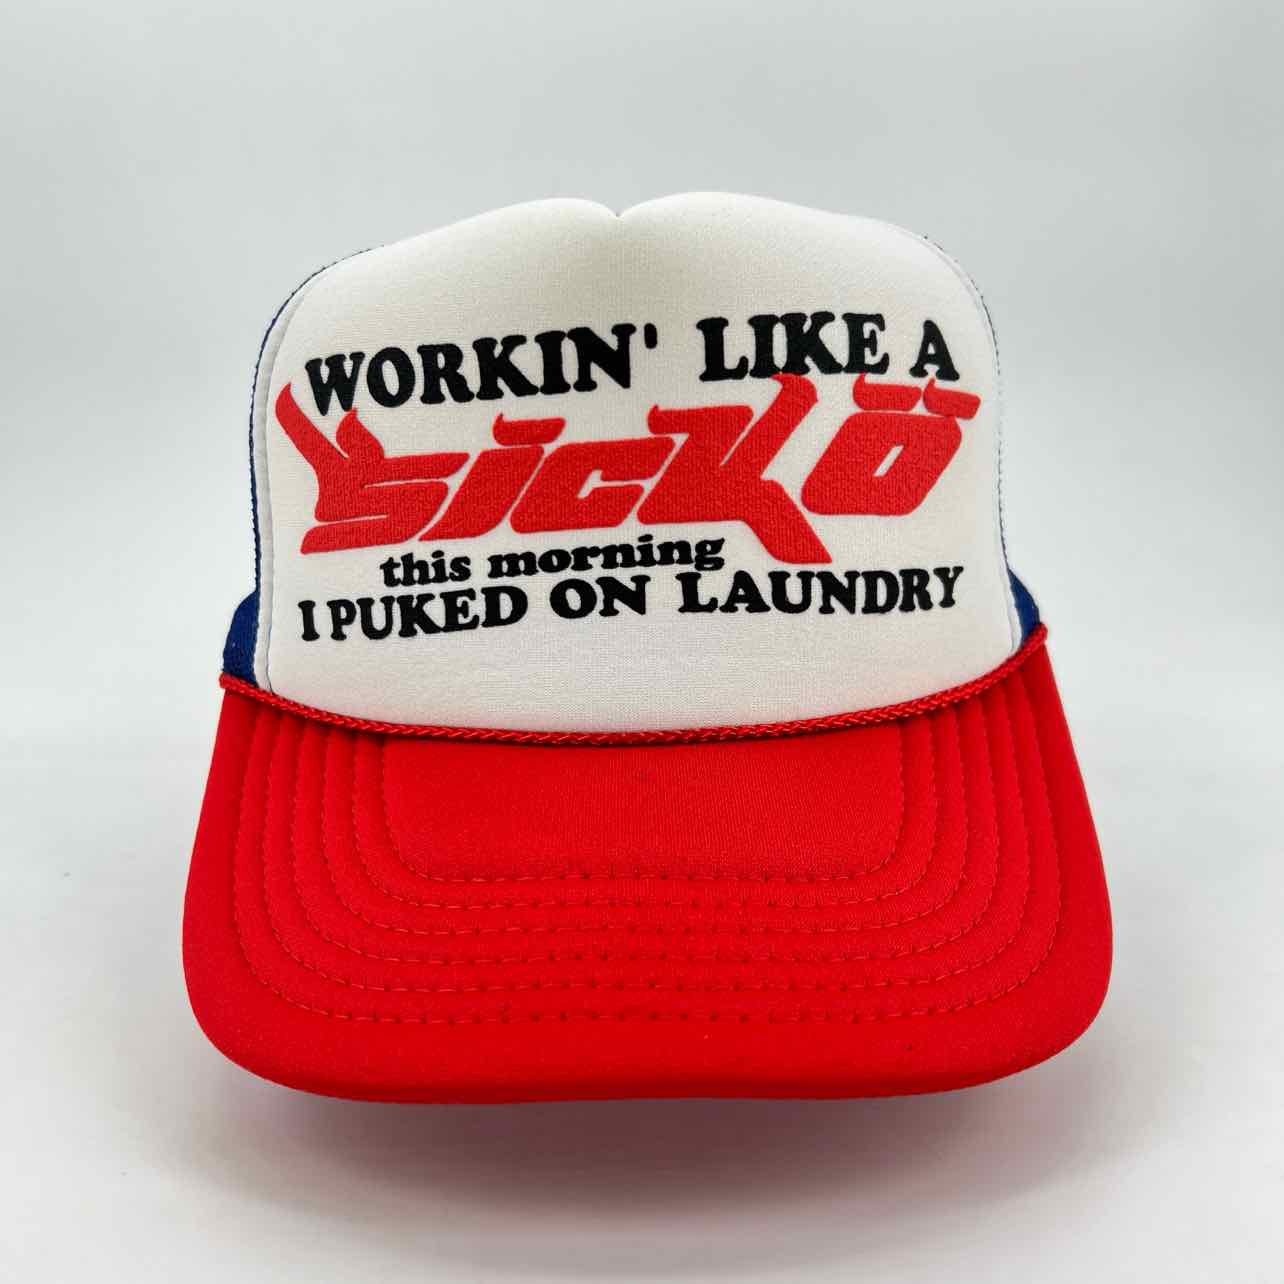 Sicko Trucker Hat "PUKED ON LAUNDRY" New RED BLUE Size OS